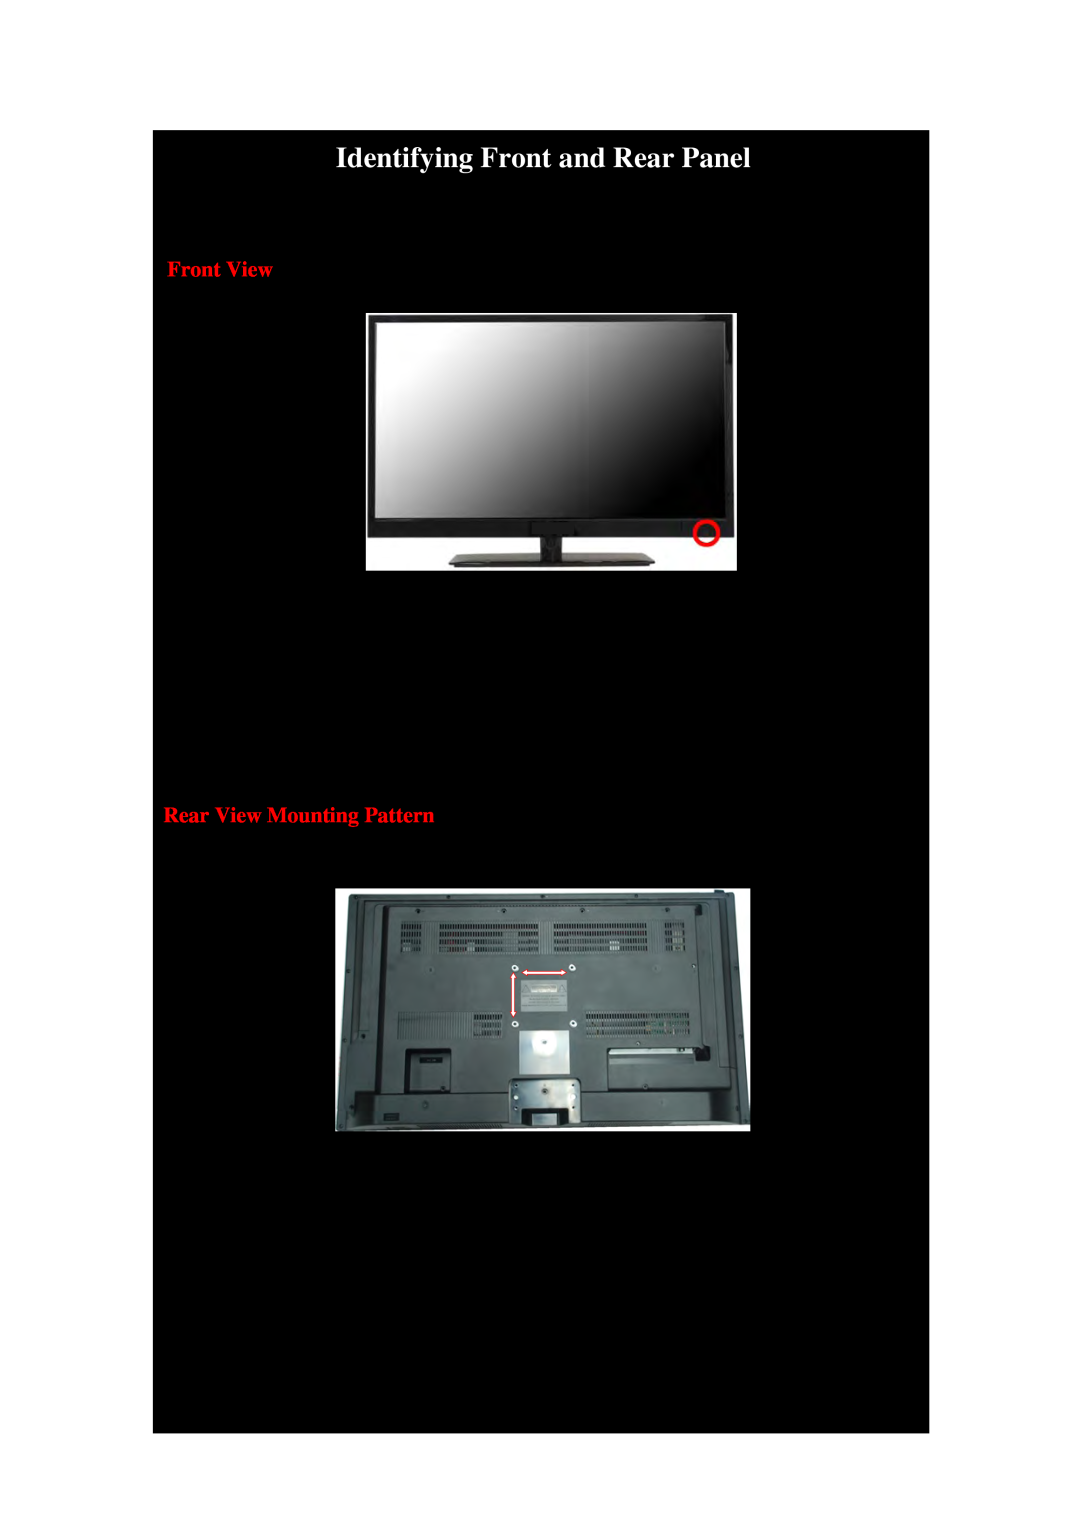 Sears PLDED3273A-B user manual Identifying Front and Rear Panel, Front View, Rear View Mounting Pattern 